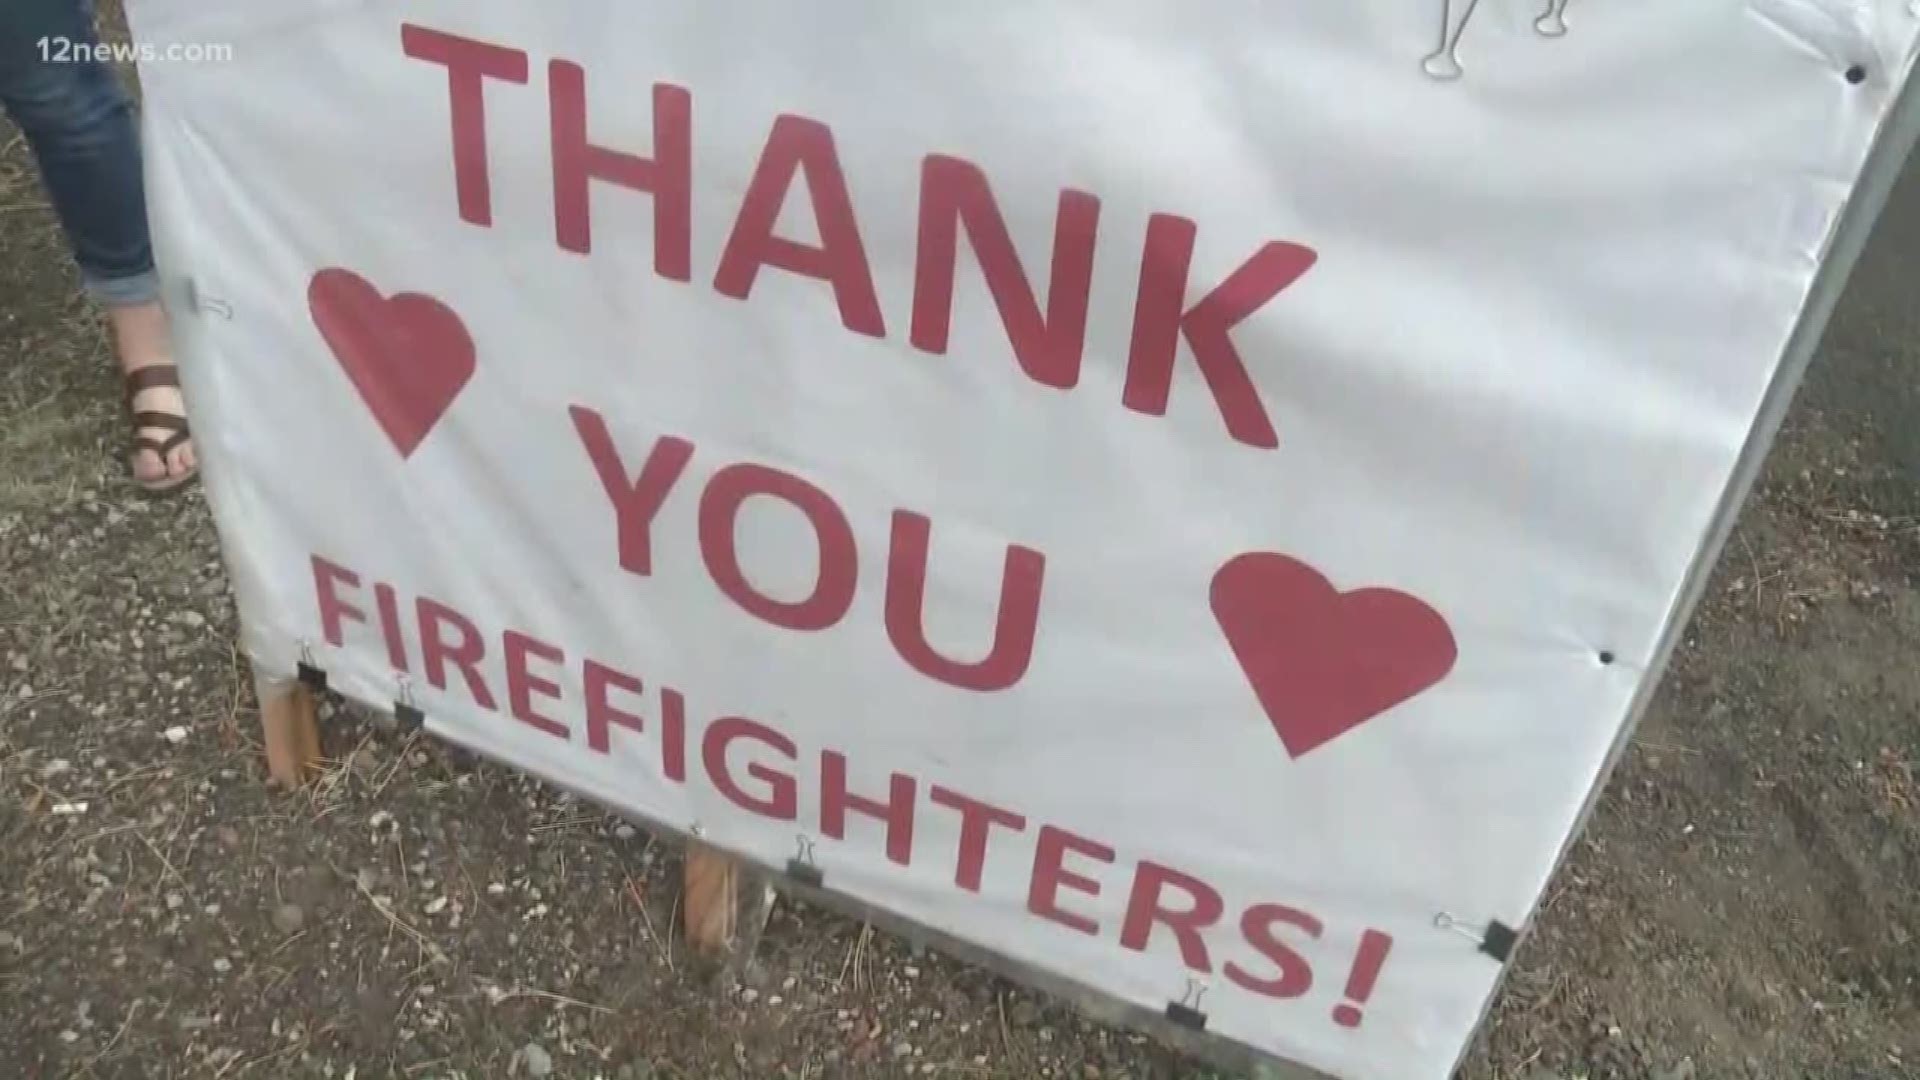 Signs are going up in and around Flagstaff warning people of the fire danger but also showing thanks for the hard work the firefighters are doing to keep everyone safe. One cafe owner is even offering free coffee to those working the fire.